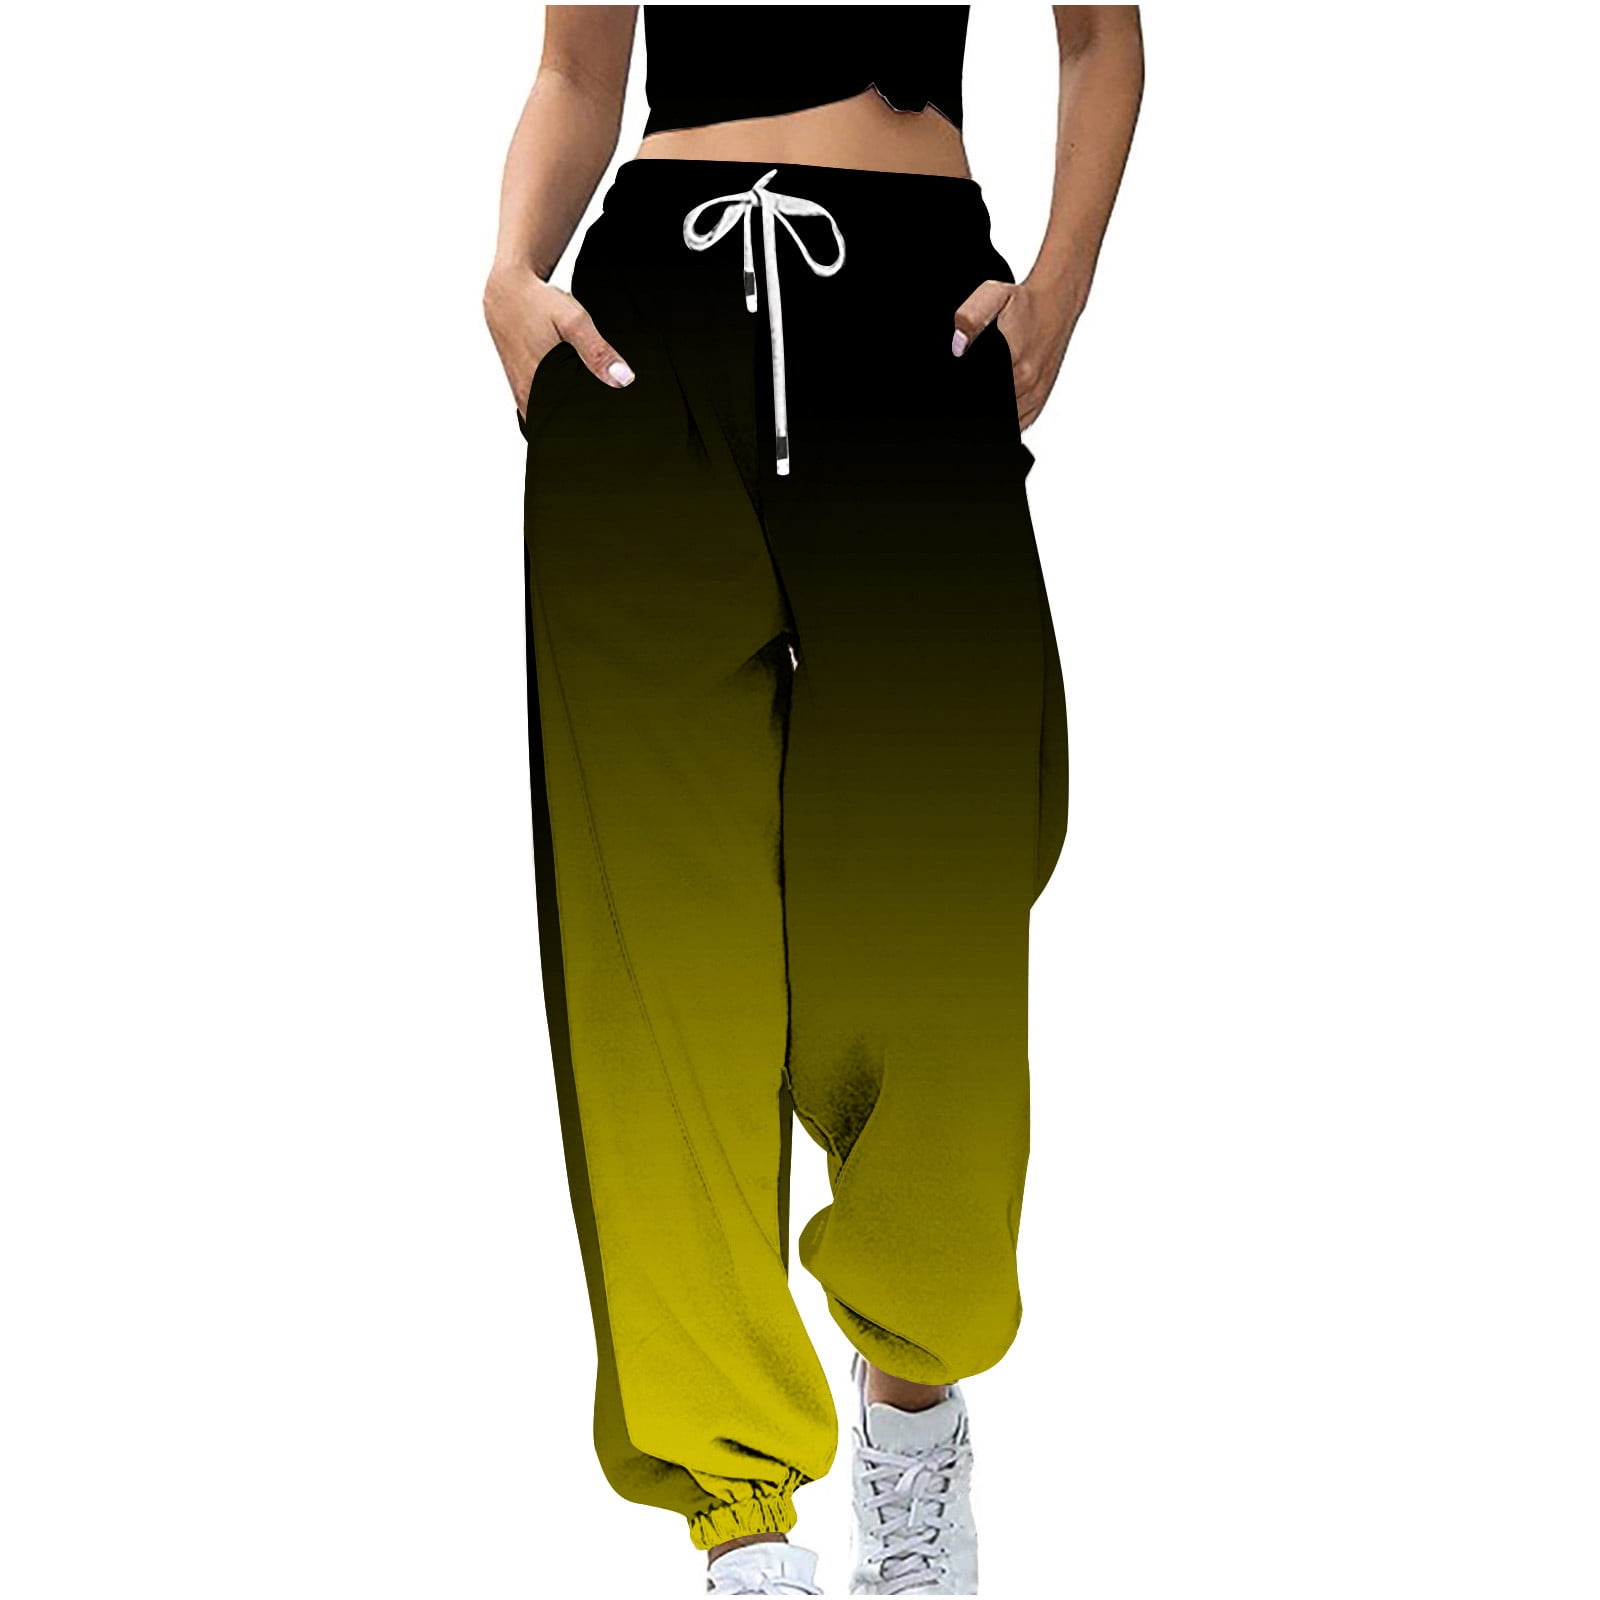 BUIgtTklOP Pants For Women Clearance Womens Gradient Sweatpants Loose  Lounge Trousers With Pockets High Waist Pants 